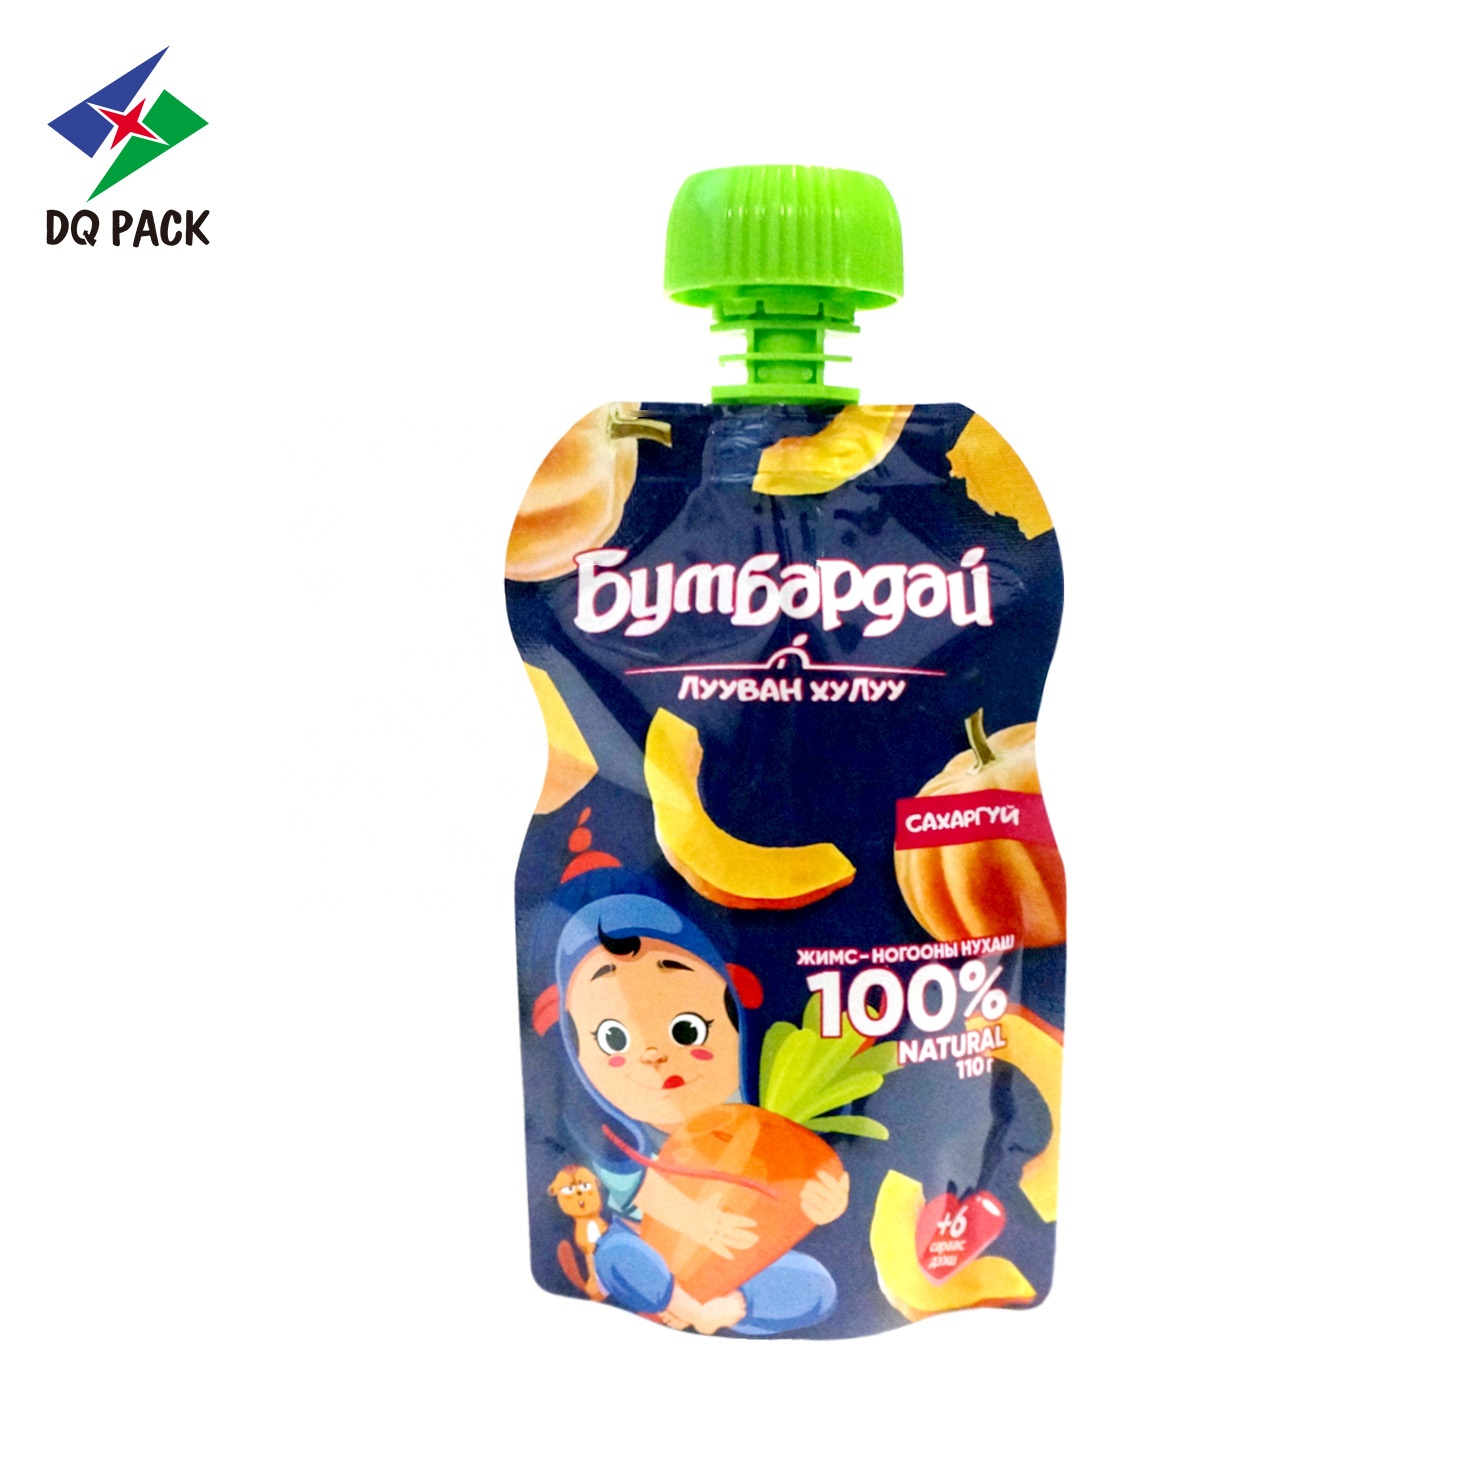 DQ PACK Custom Printed Juice Puree Baby Food Spout Pouch Bag Plastic Retort Pouch